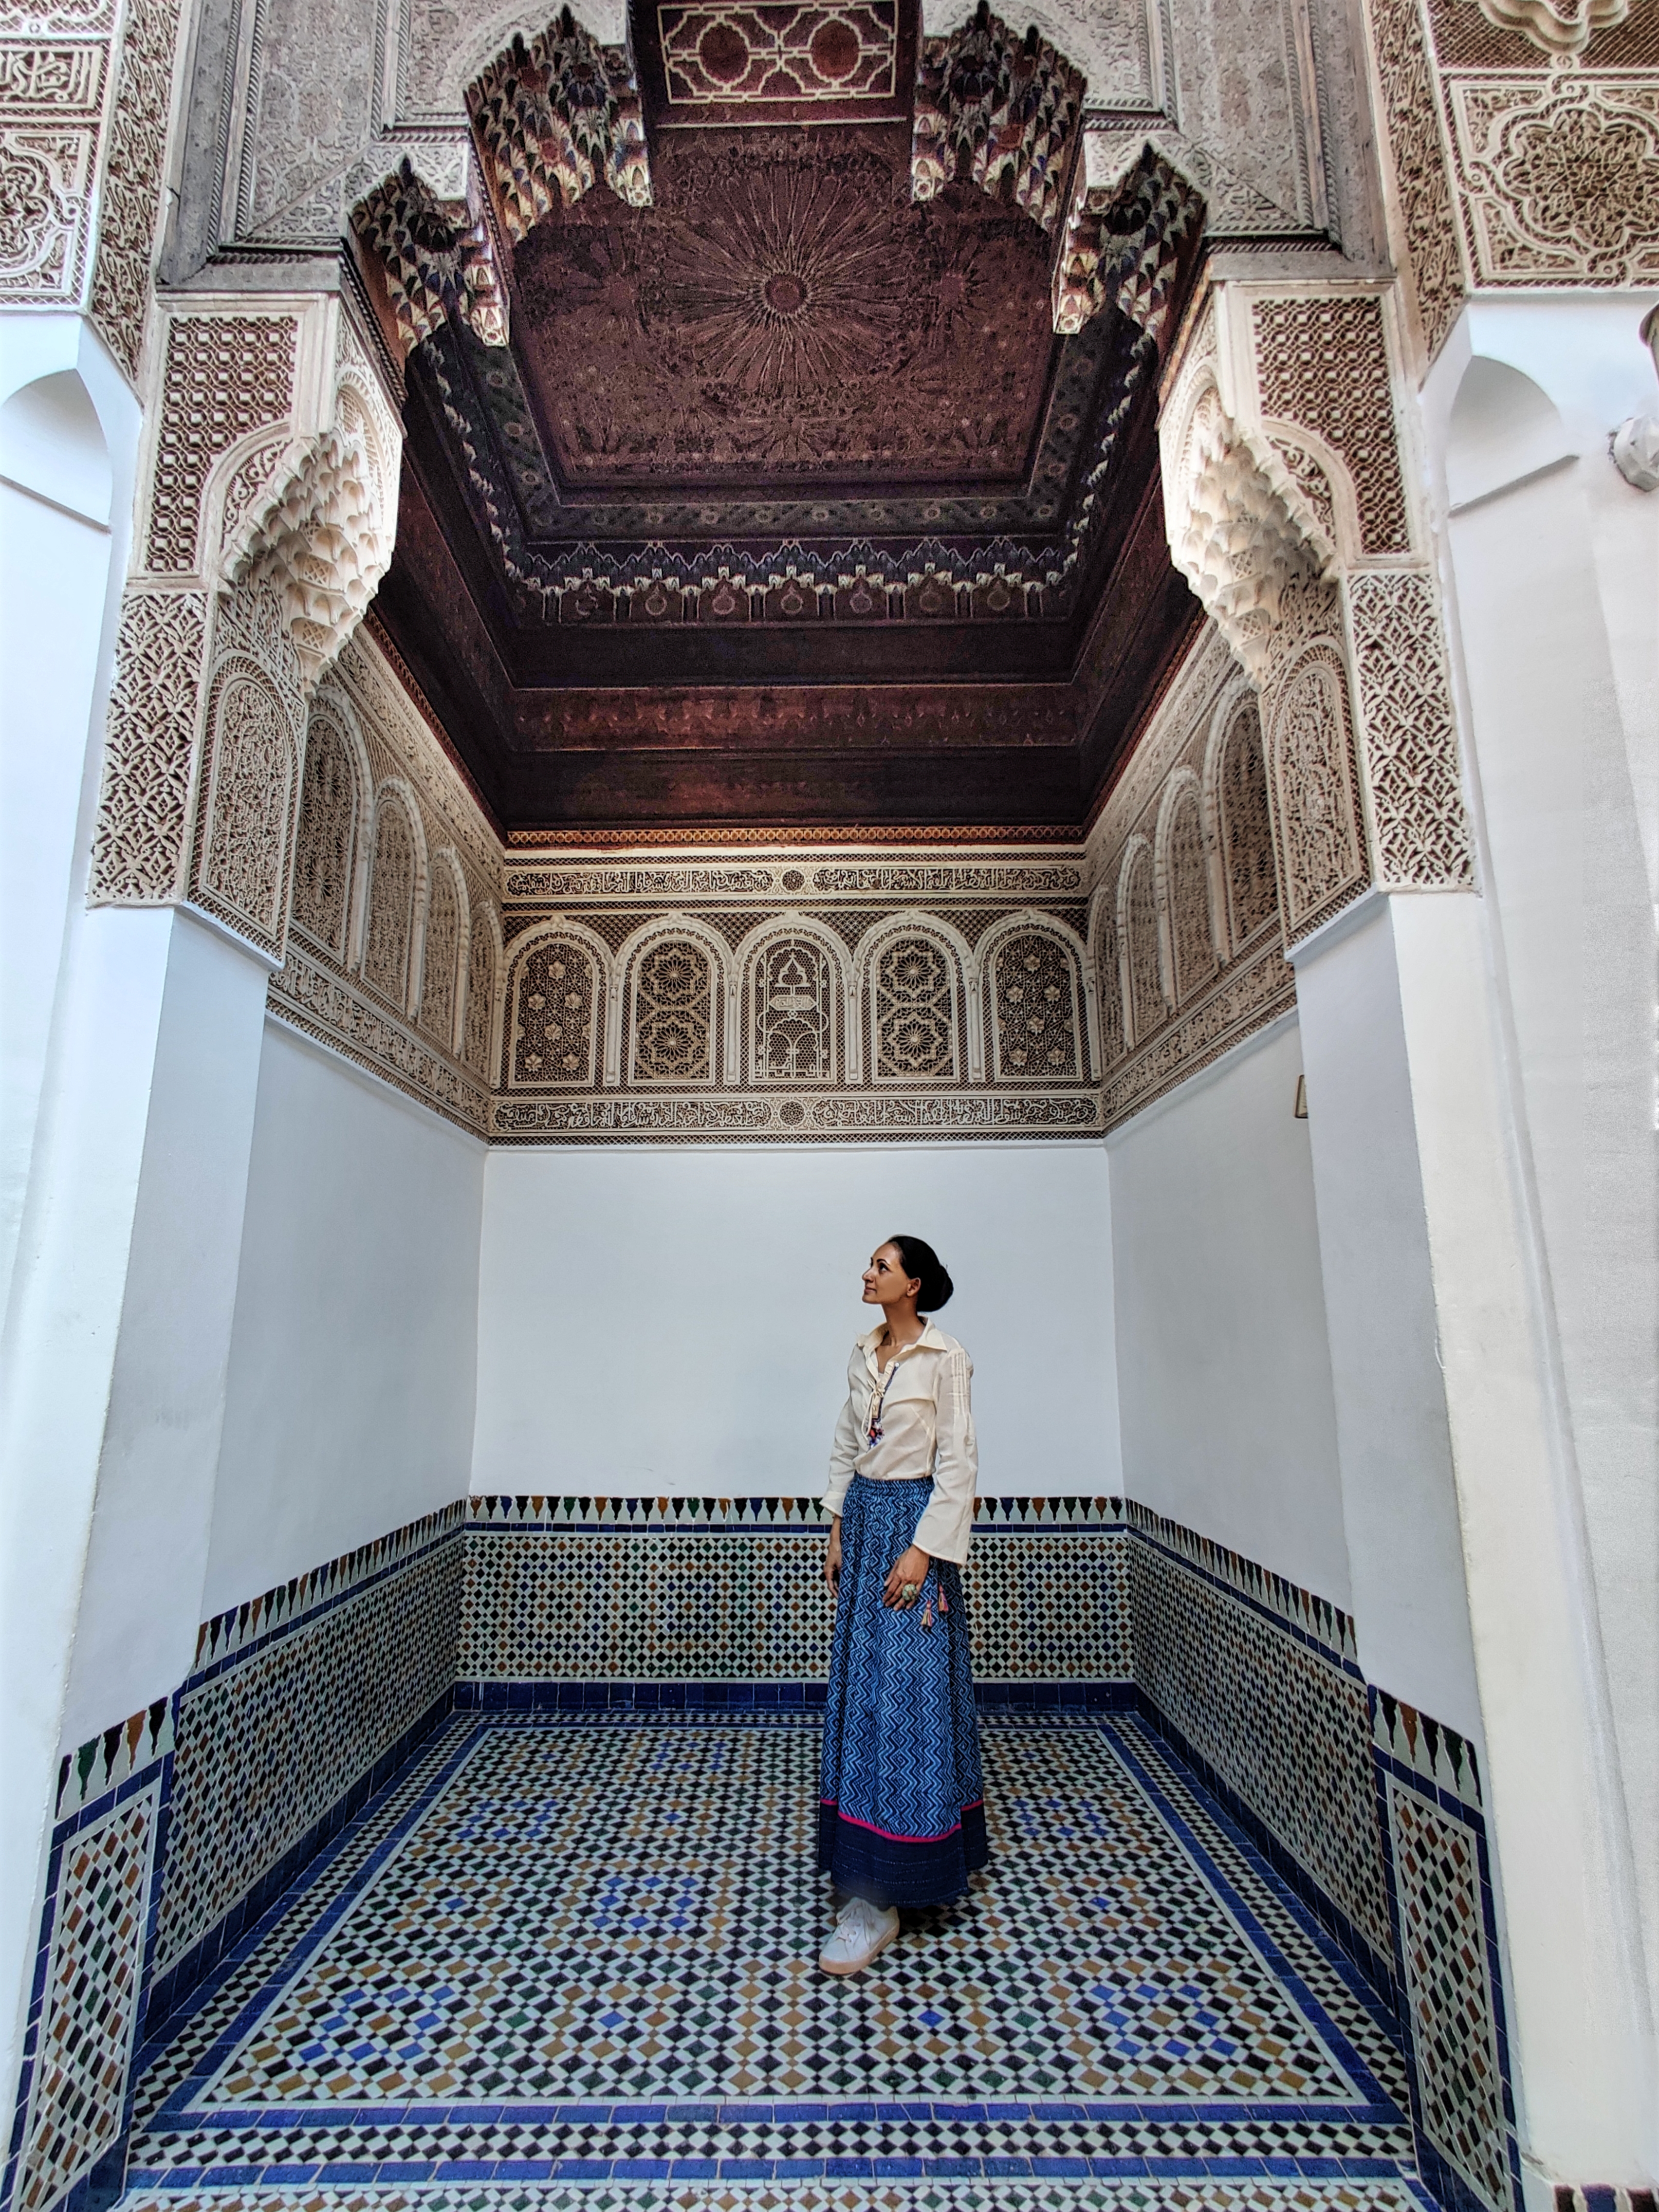 Marrakesh. The Red City. The Daughter of the Desert.